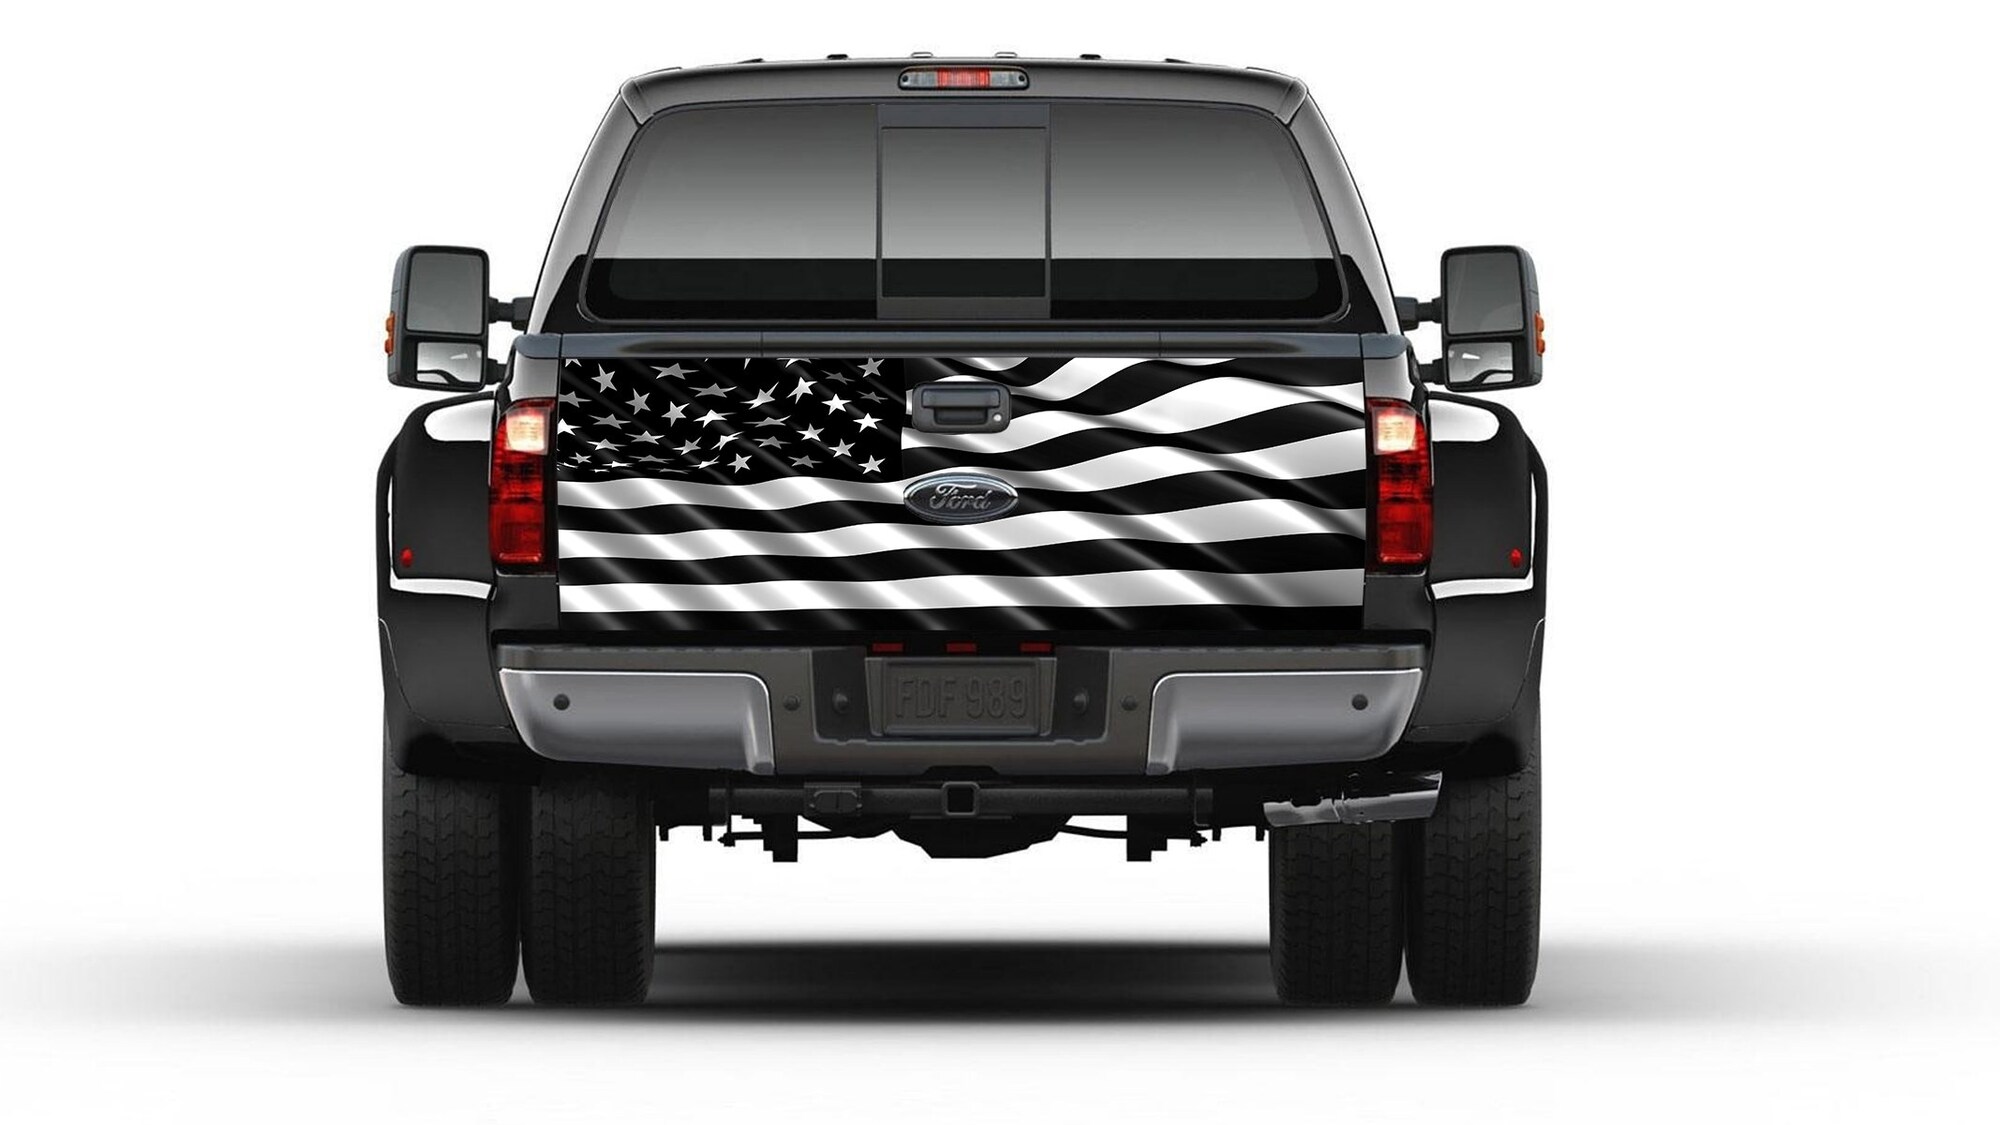 American Flag Black and White Tailgate Truck Bed Decal